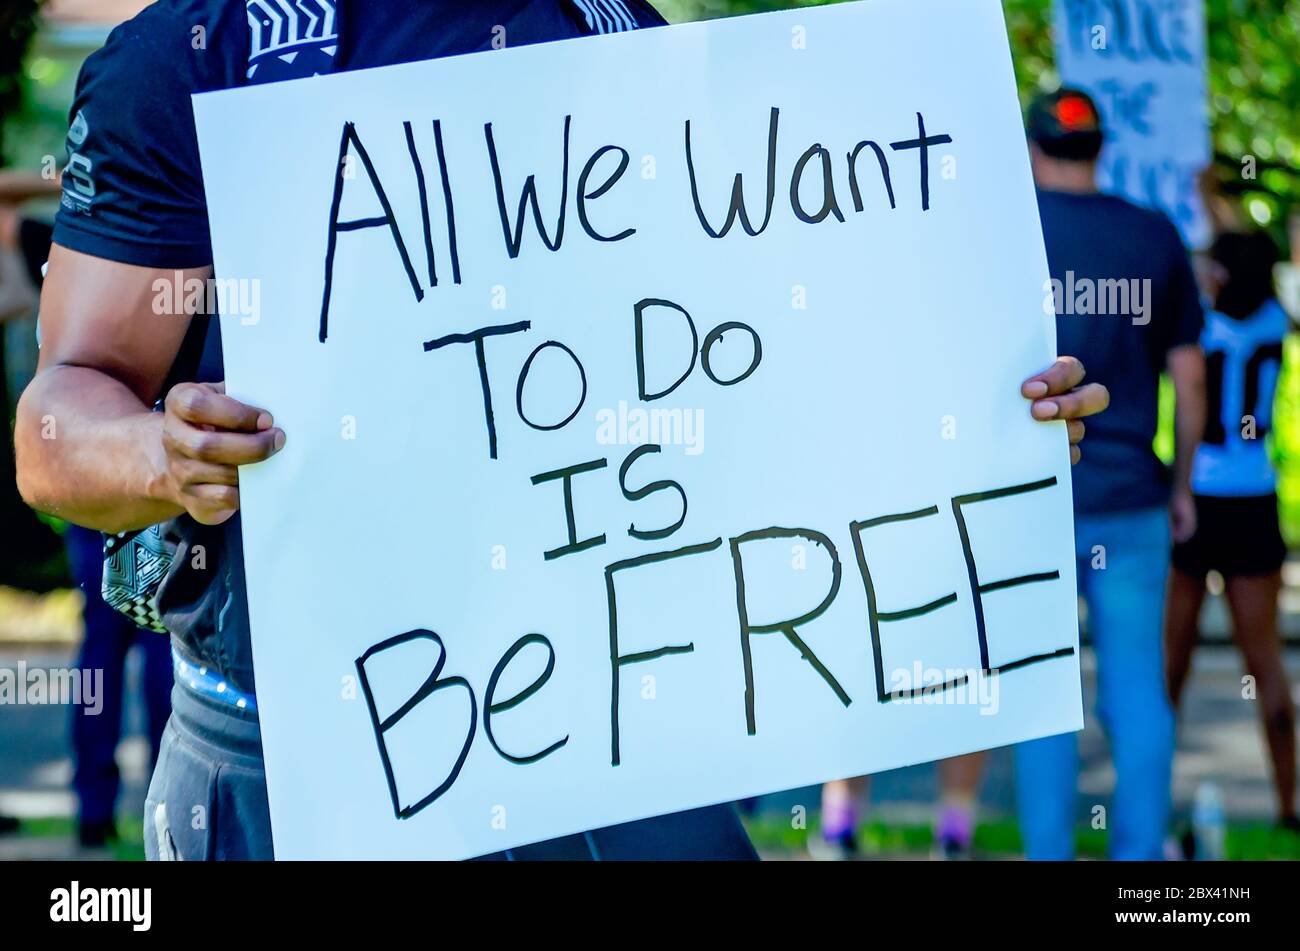 A protestor holds a sign while at a protest against police brutality, June 4, 2020, at Memorial Park in Mobile, Alabama. Stock Photo